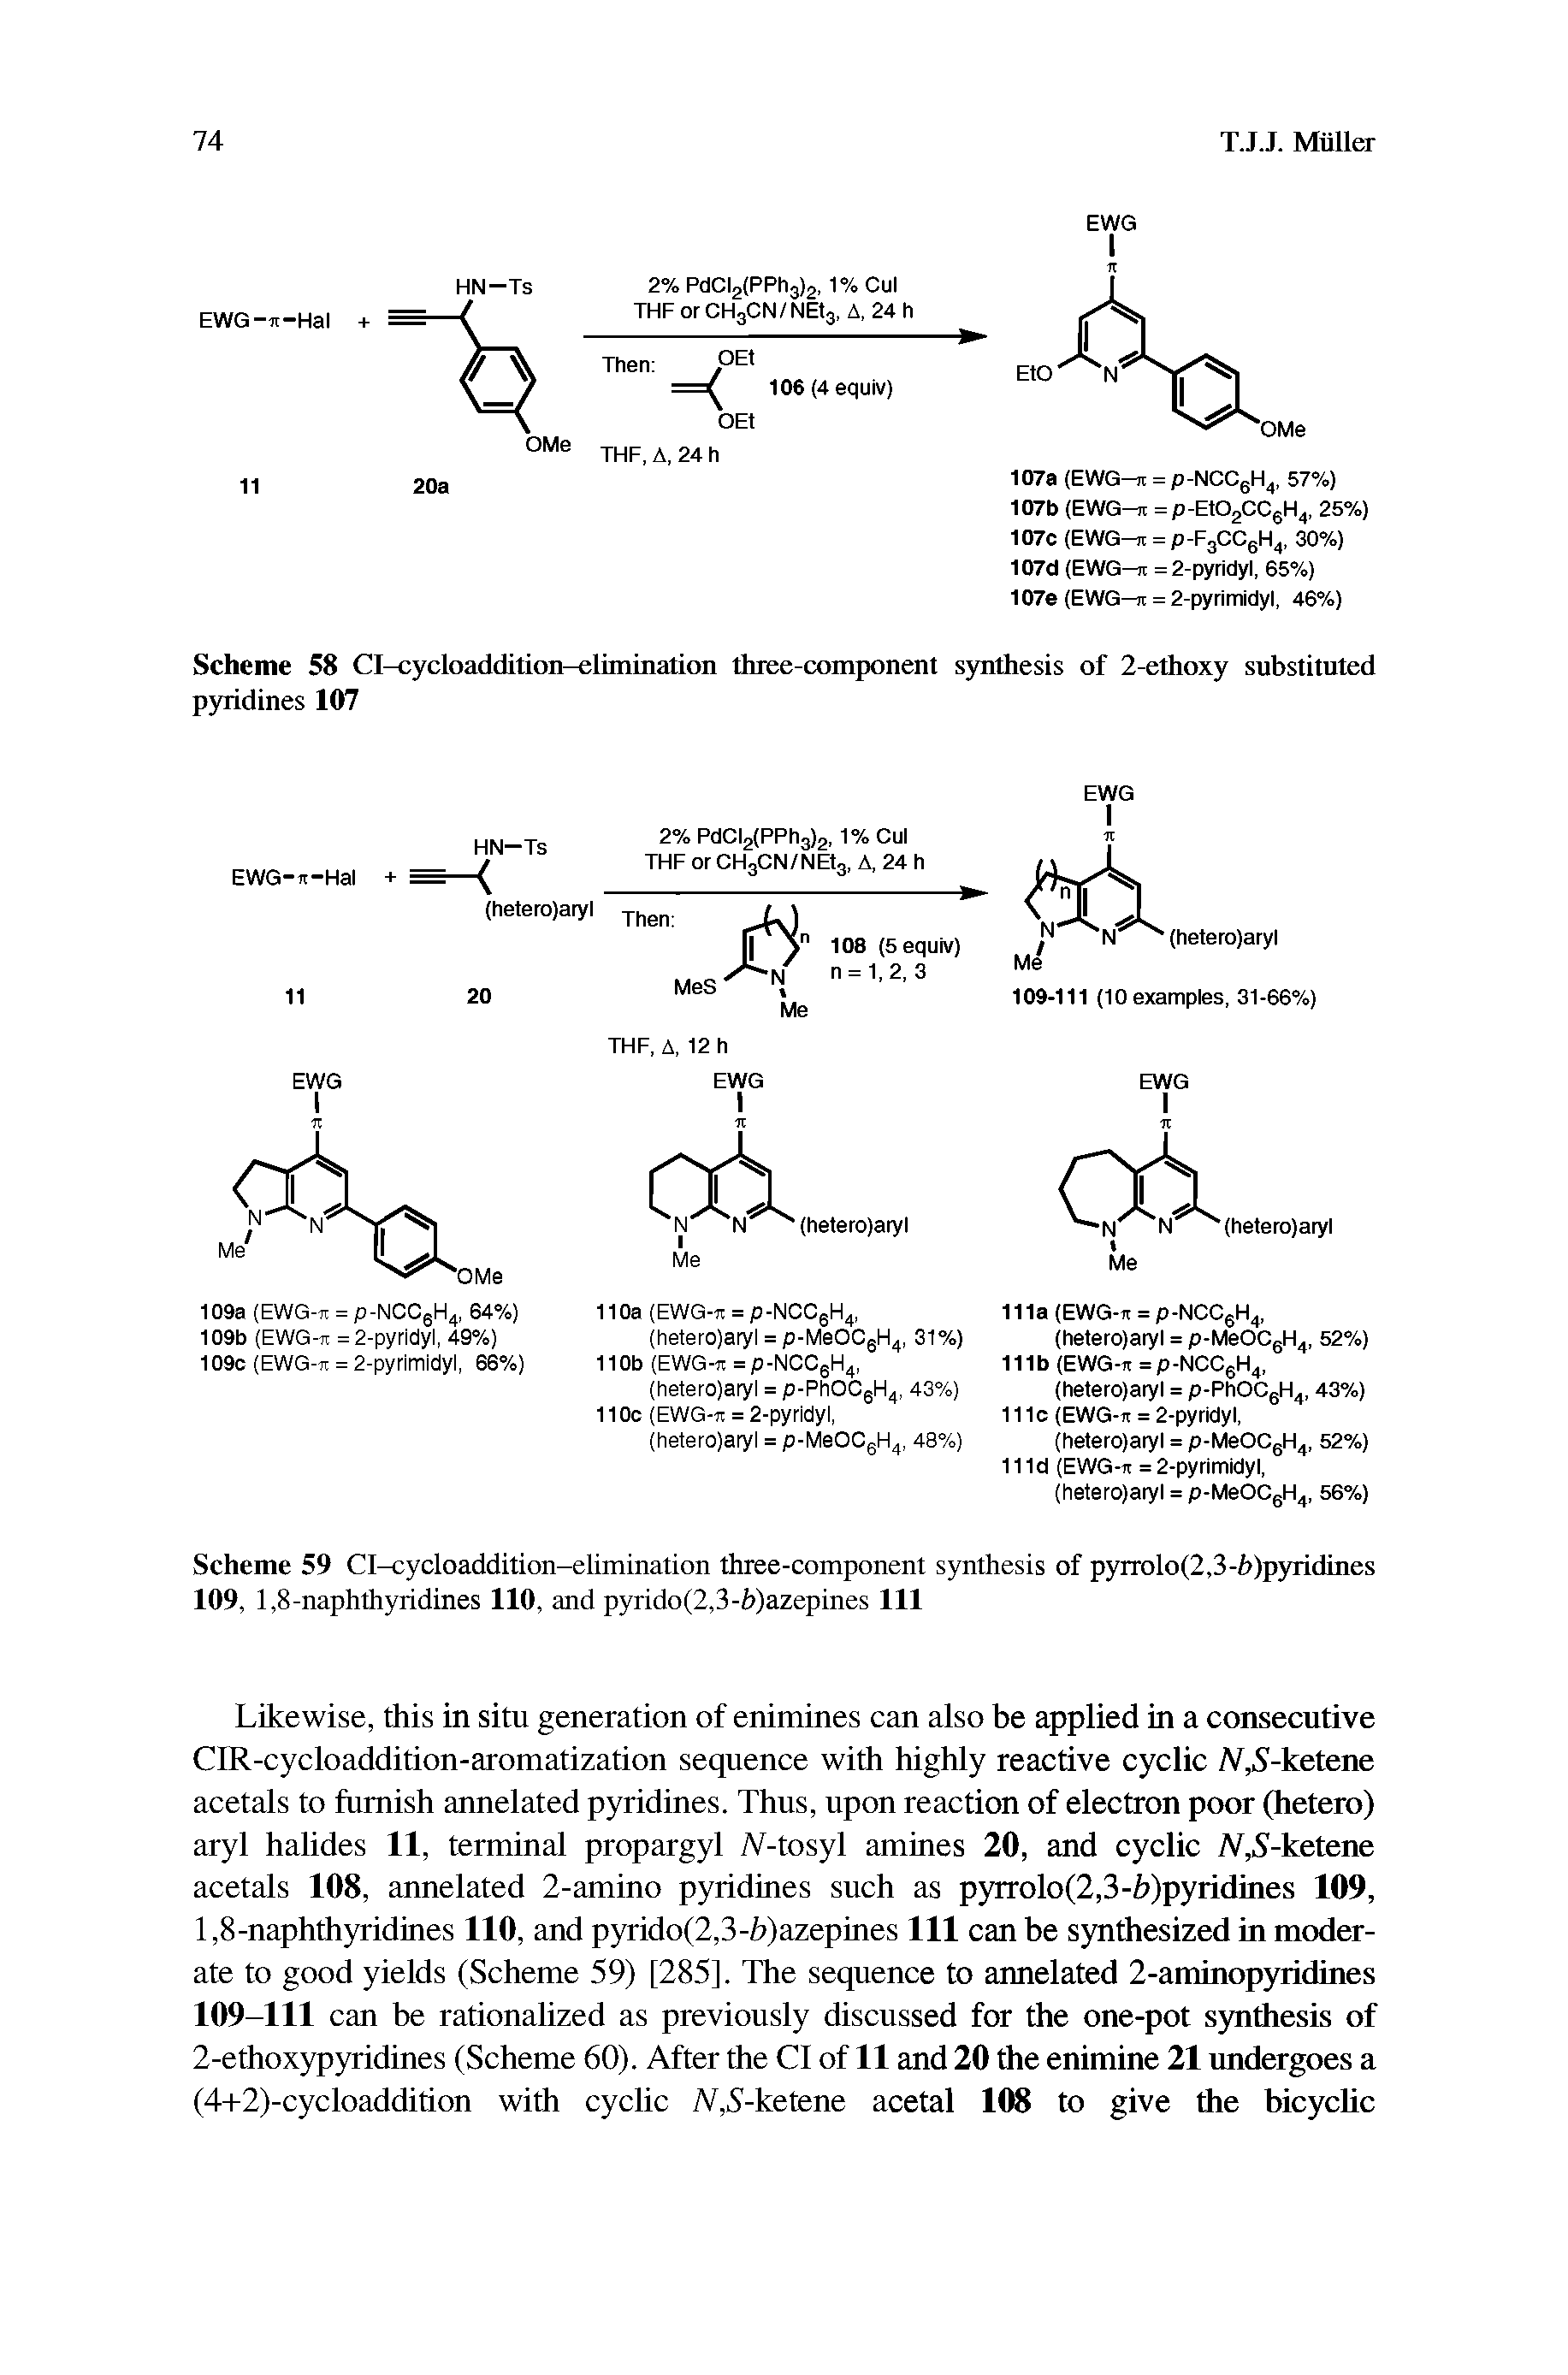 Scheme 59 Cl-cycloaddition-elimination three-component synthesis of pyrrolo(2,3- )p5 dines 109, 1,8-naphthyridines 110, and pyrido(2,3-i>)azepines 111...